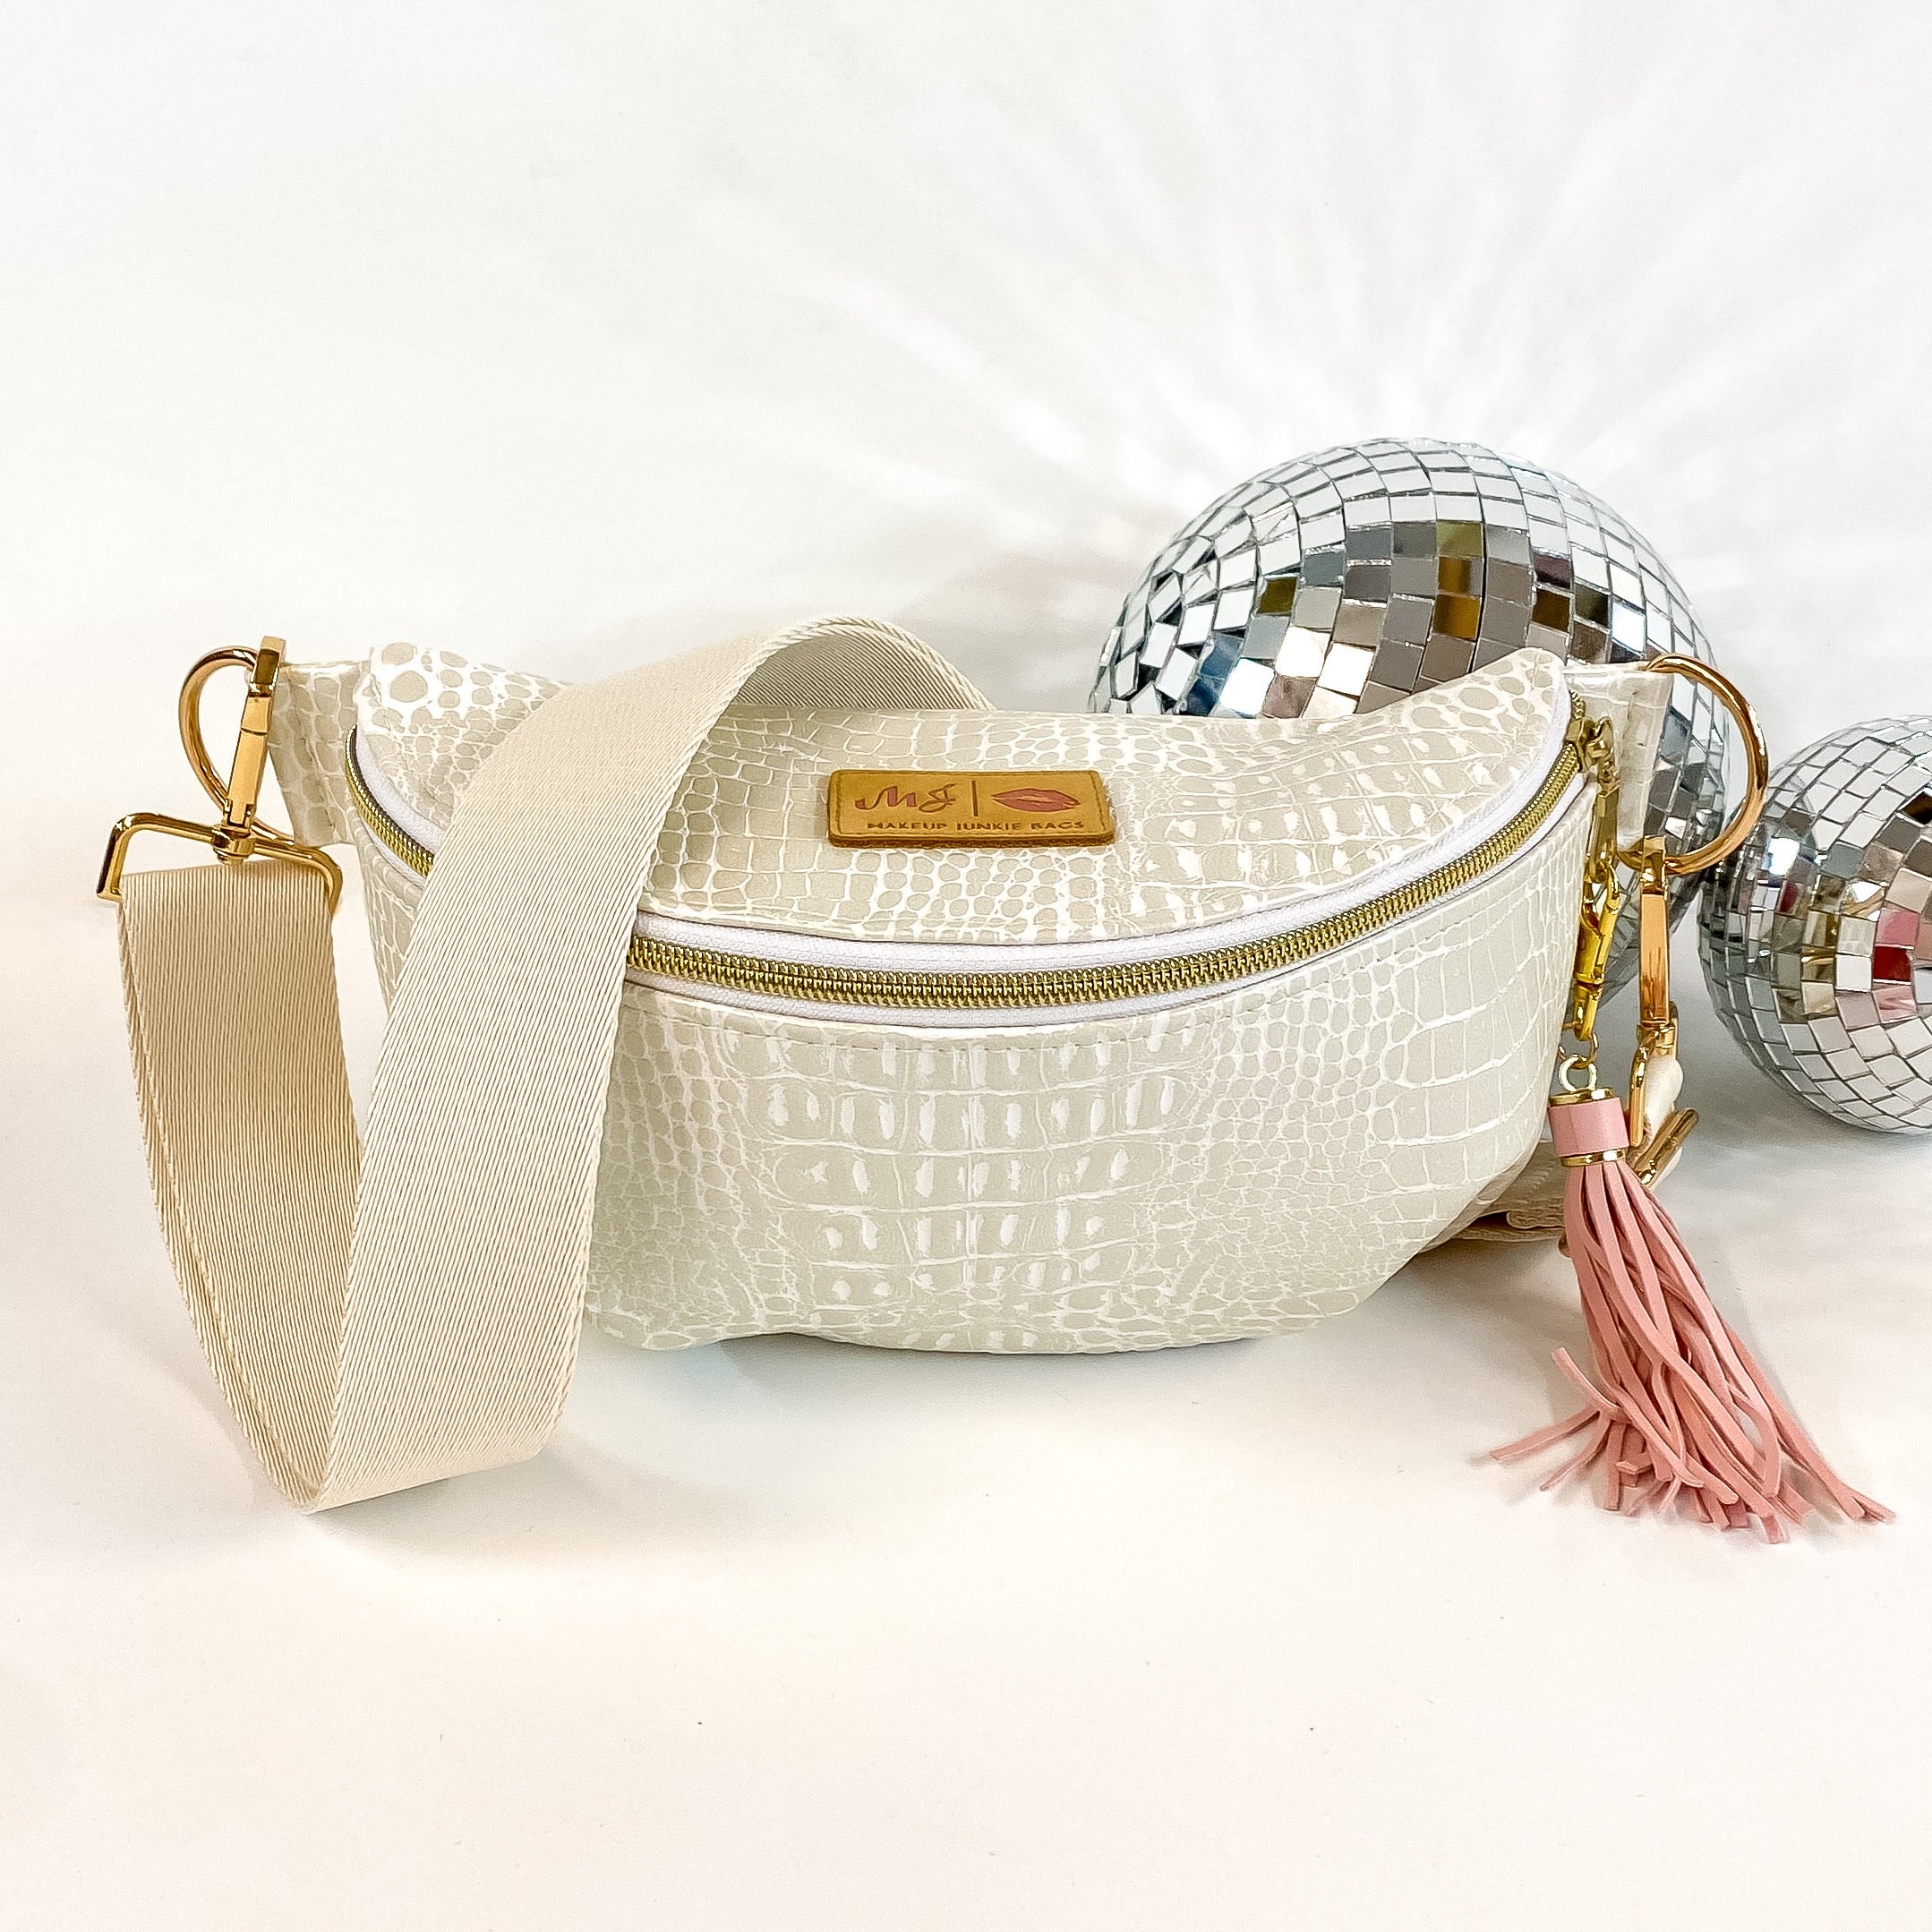 Pictured on a white background with disco balls in the background is a sidekick bag in a pearl white gator print. This bag includes a middle zipper and a tassel.